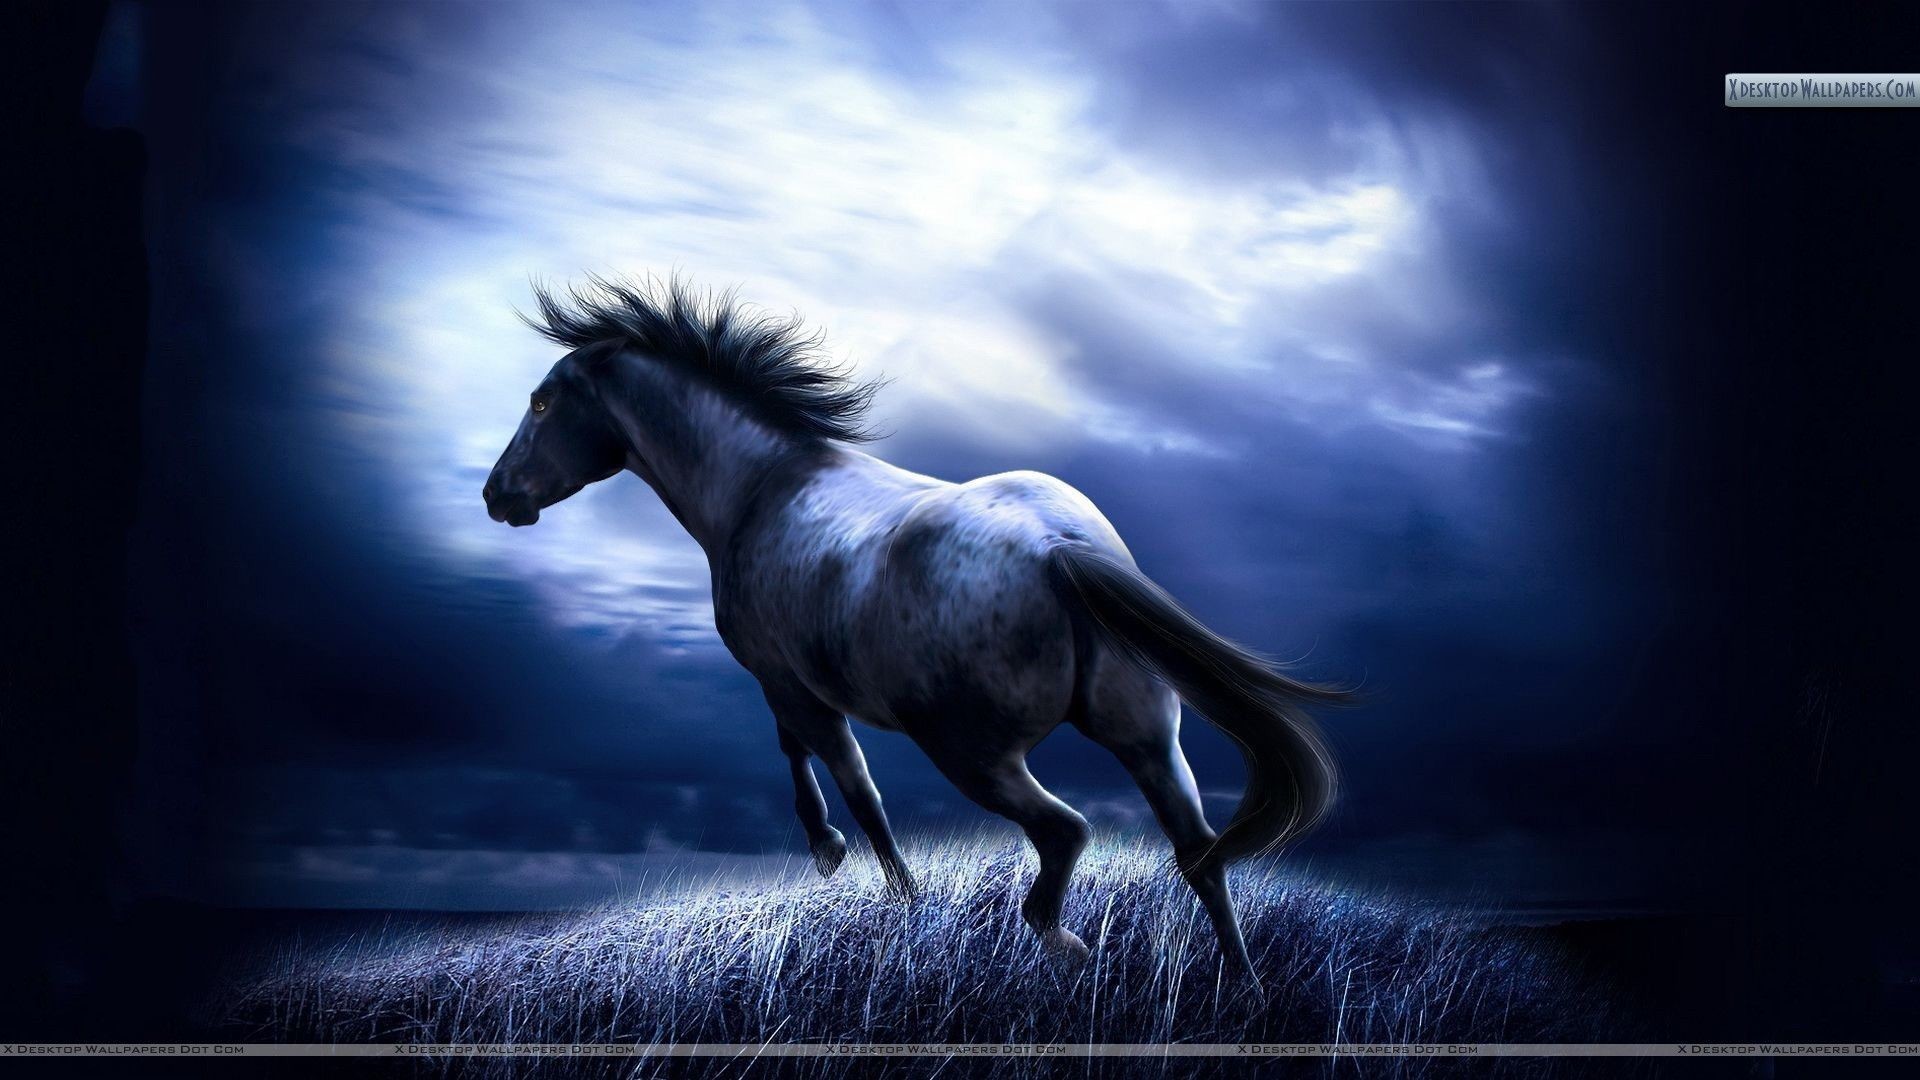 Wallpapers of Horses (69+ pictures)